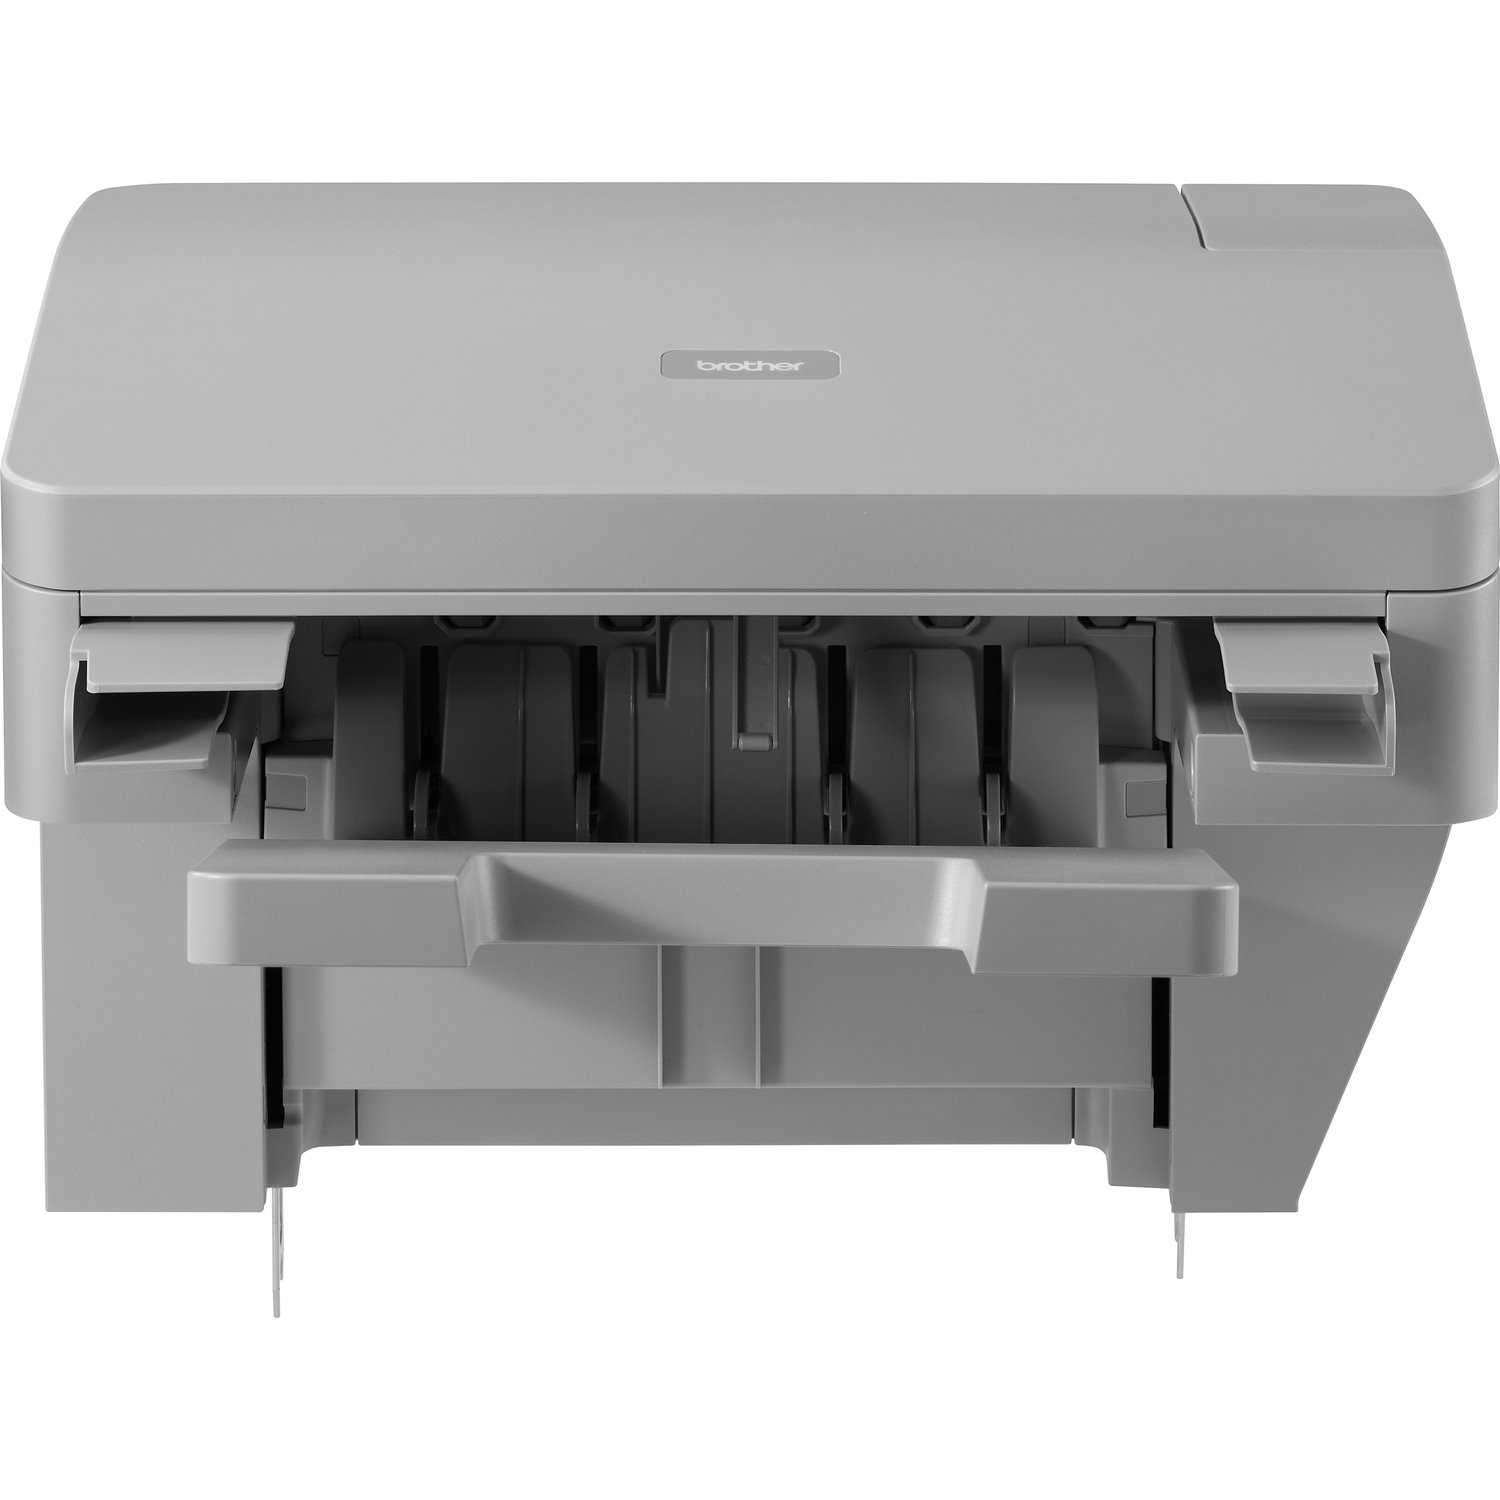 Brother SF-4000 Stapler Finisher adds new paper output functions to your Brother printer including stapling, offsetting, and stacking.